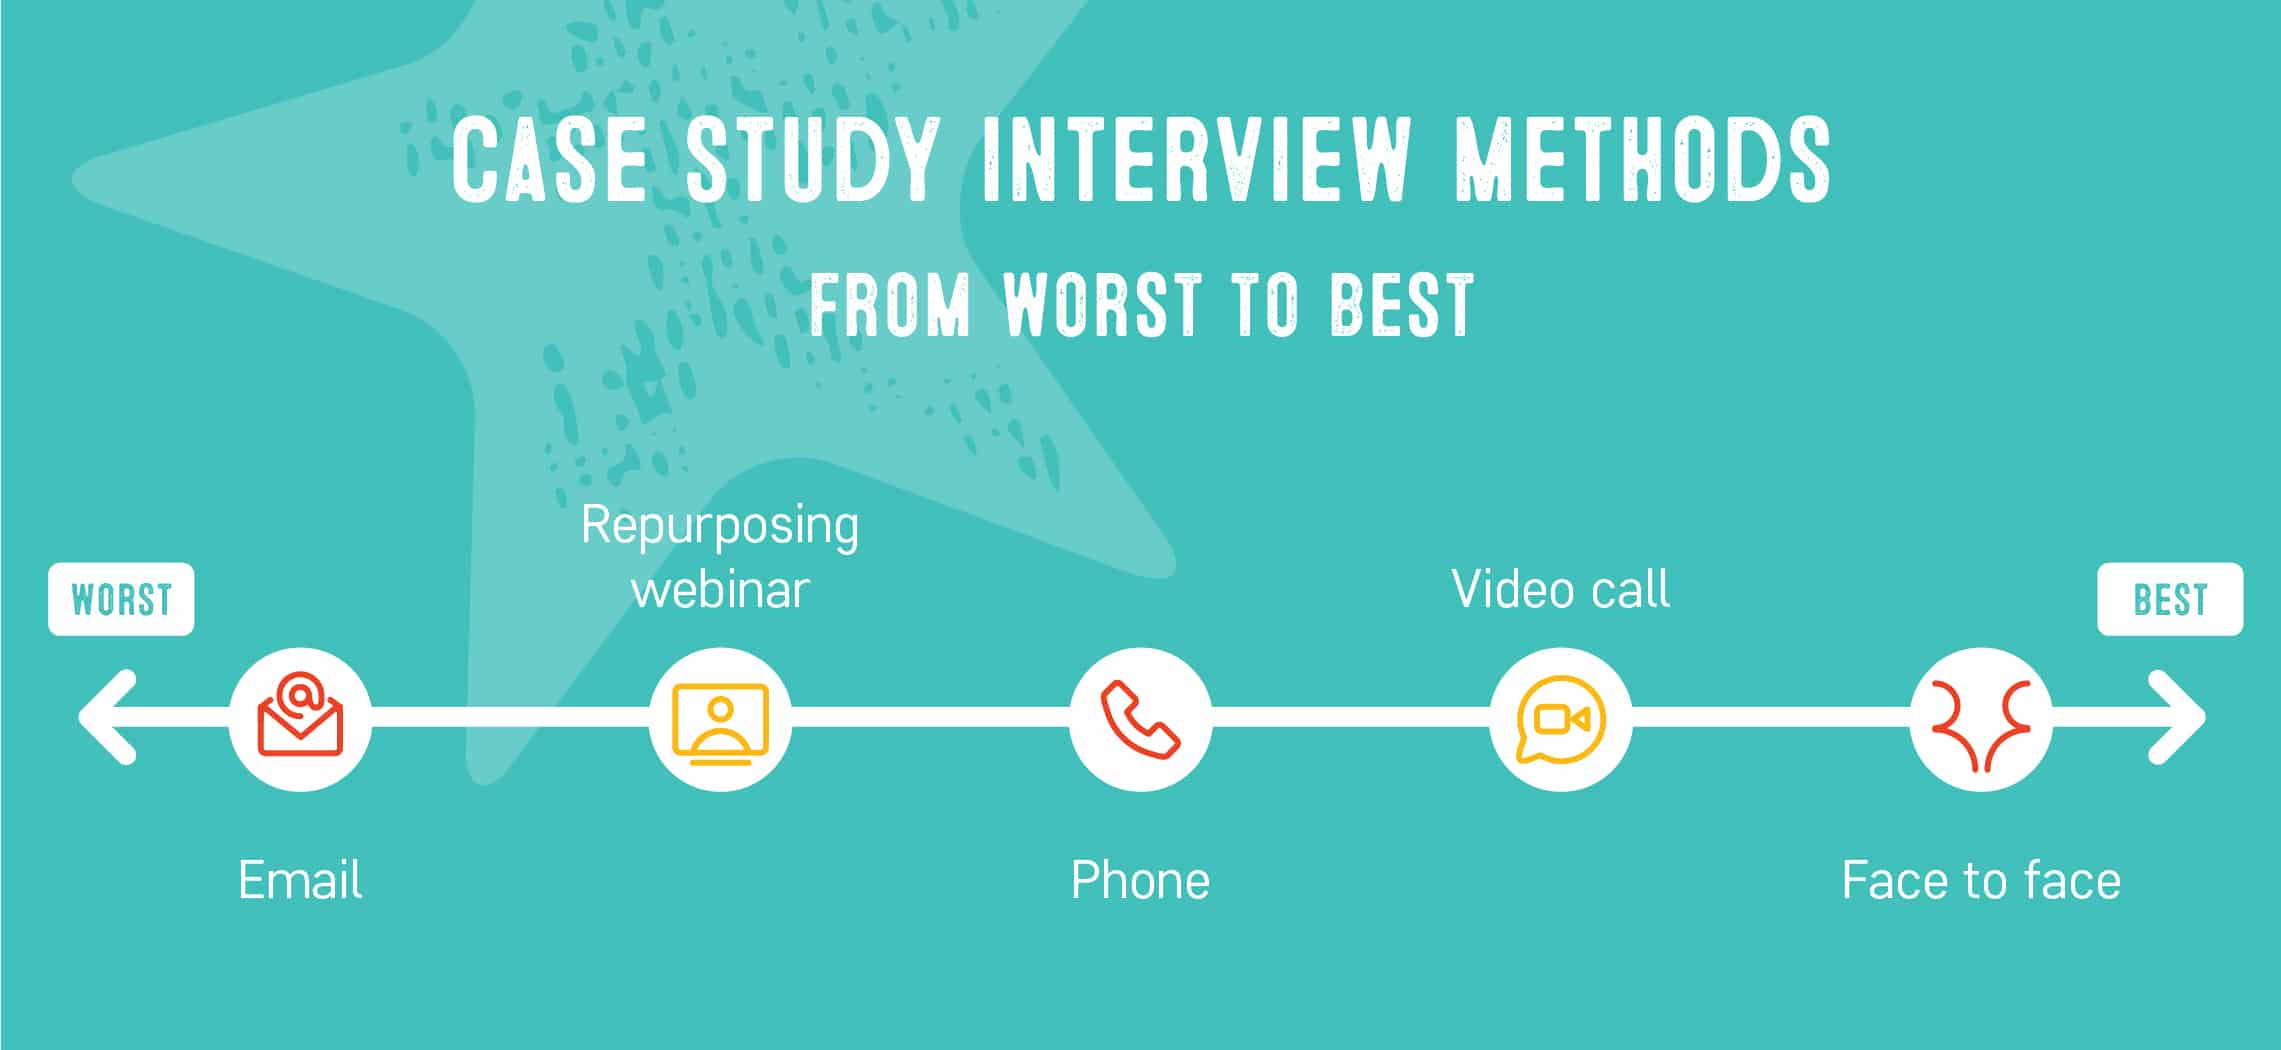 Case study questions: Best to worst interview methods